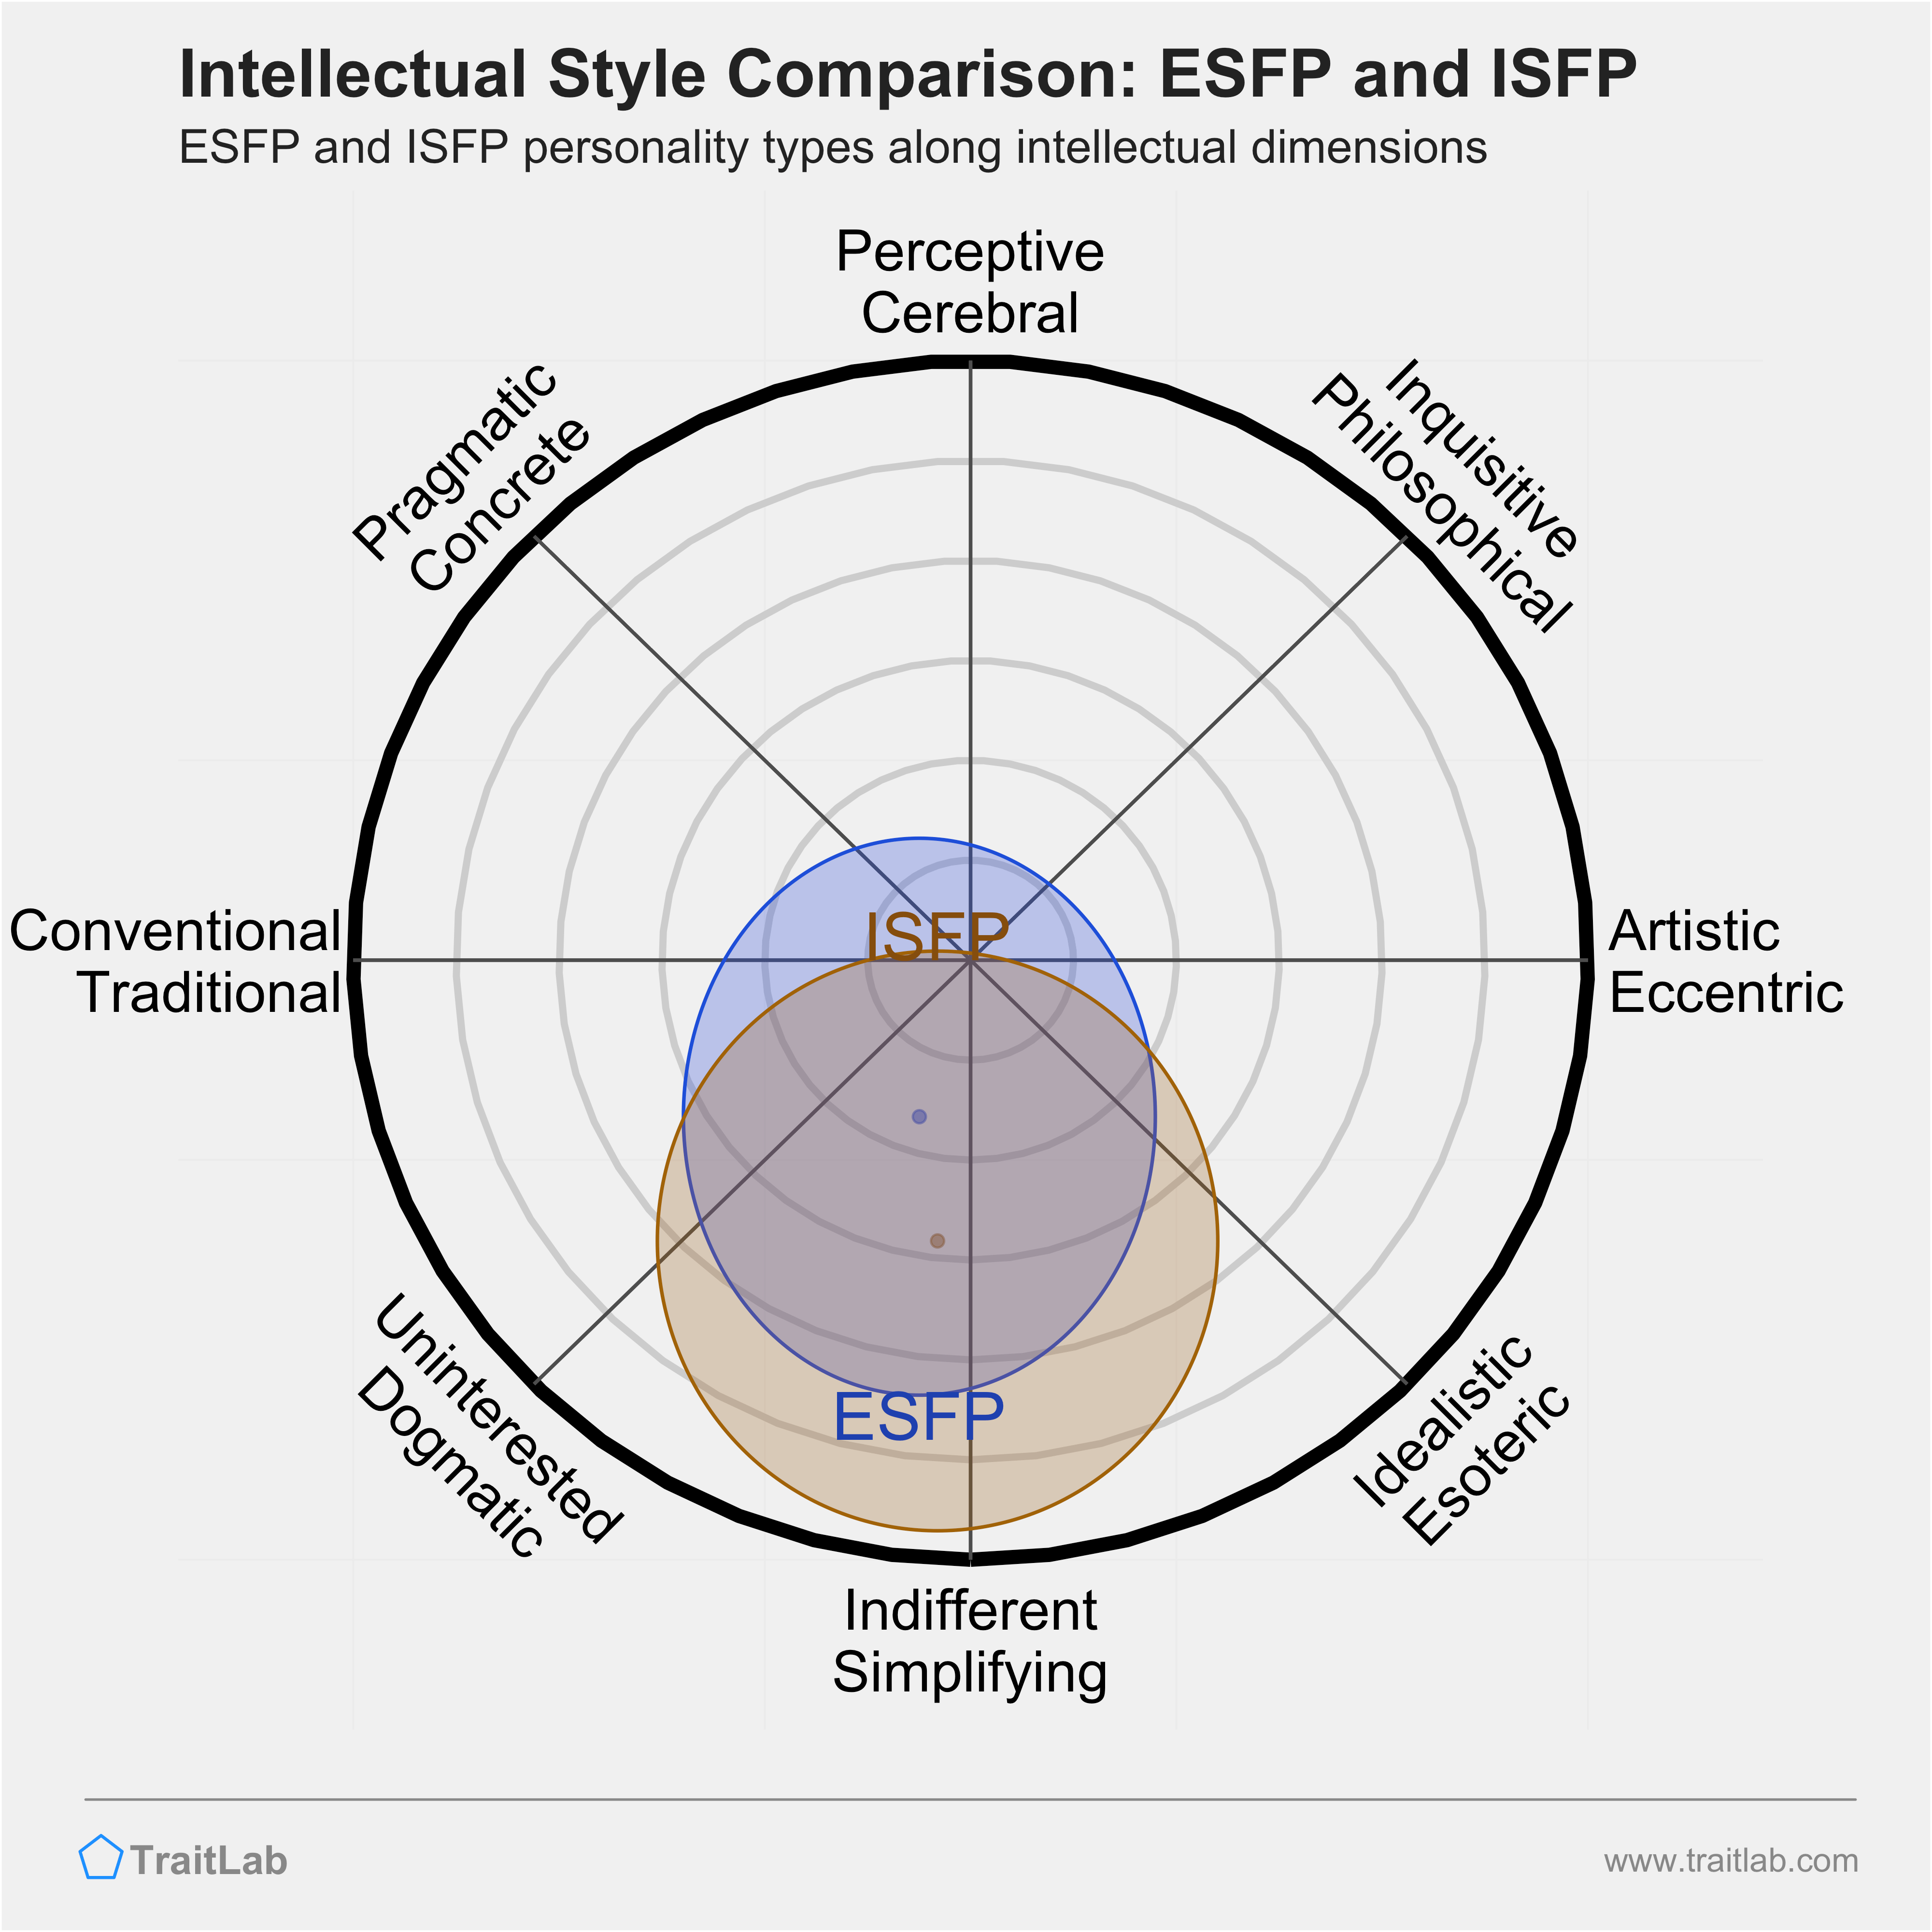 ESFP and ISFP comparison across intellectual dimensions